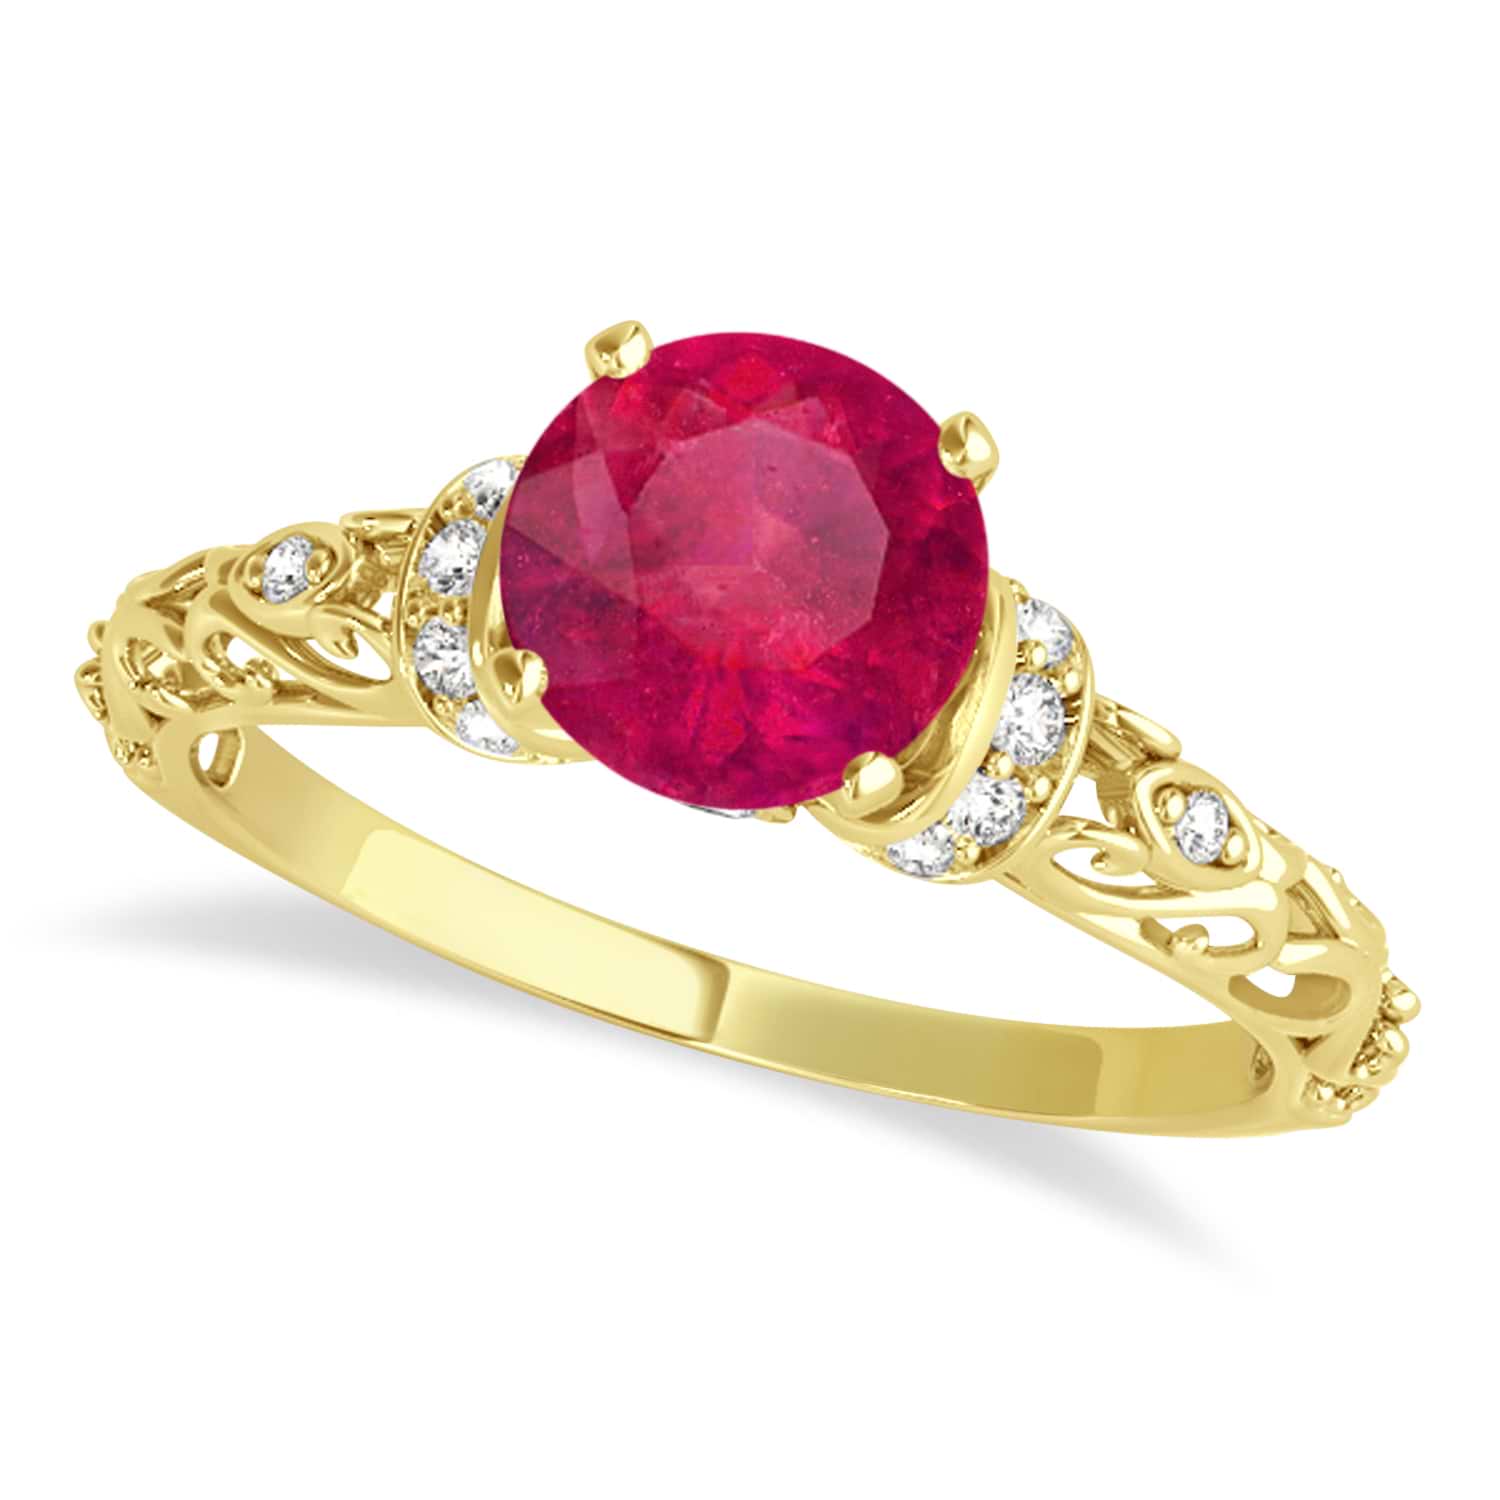 Ruby & Diamond Antique Engagement Ring 14k Yellow Gold (1.62ct)